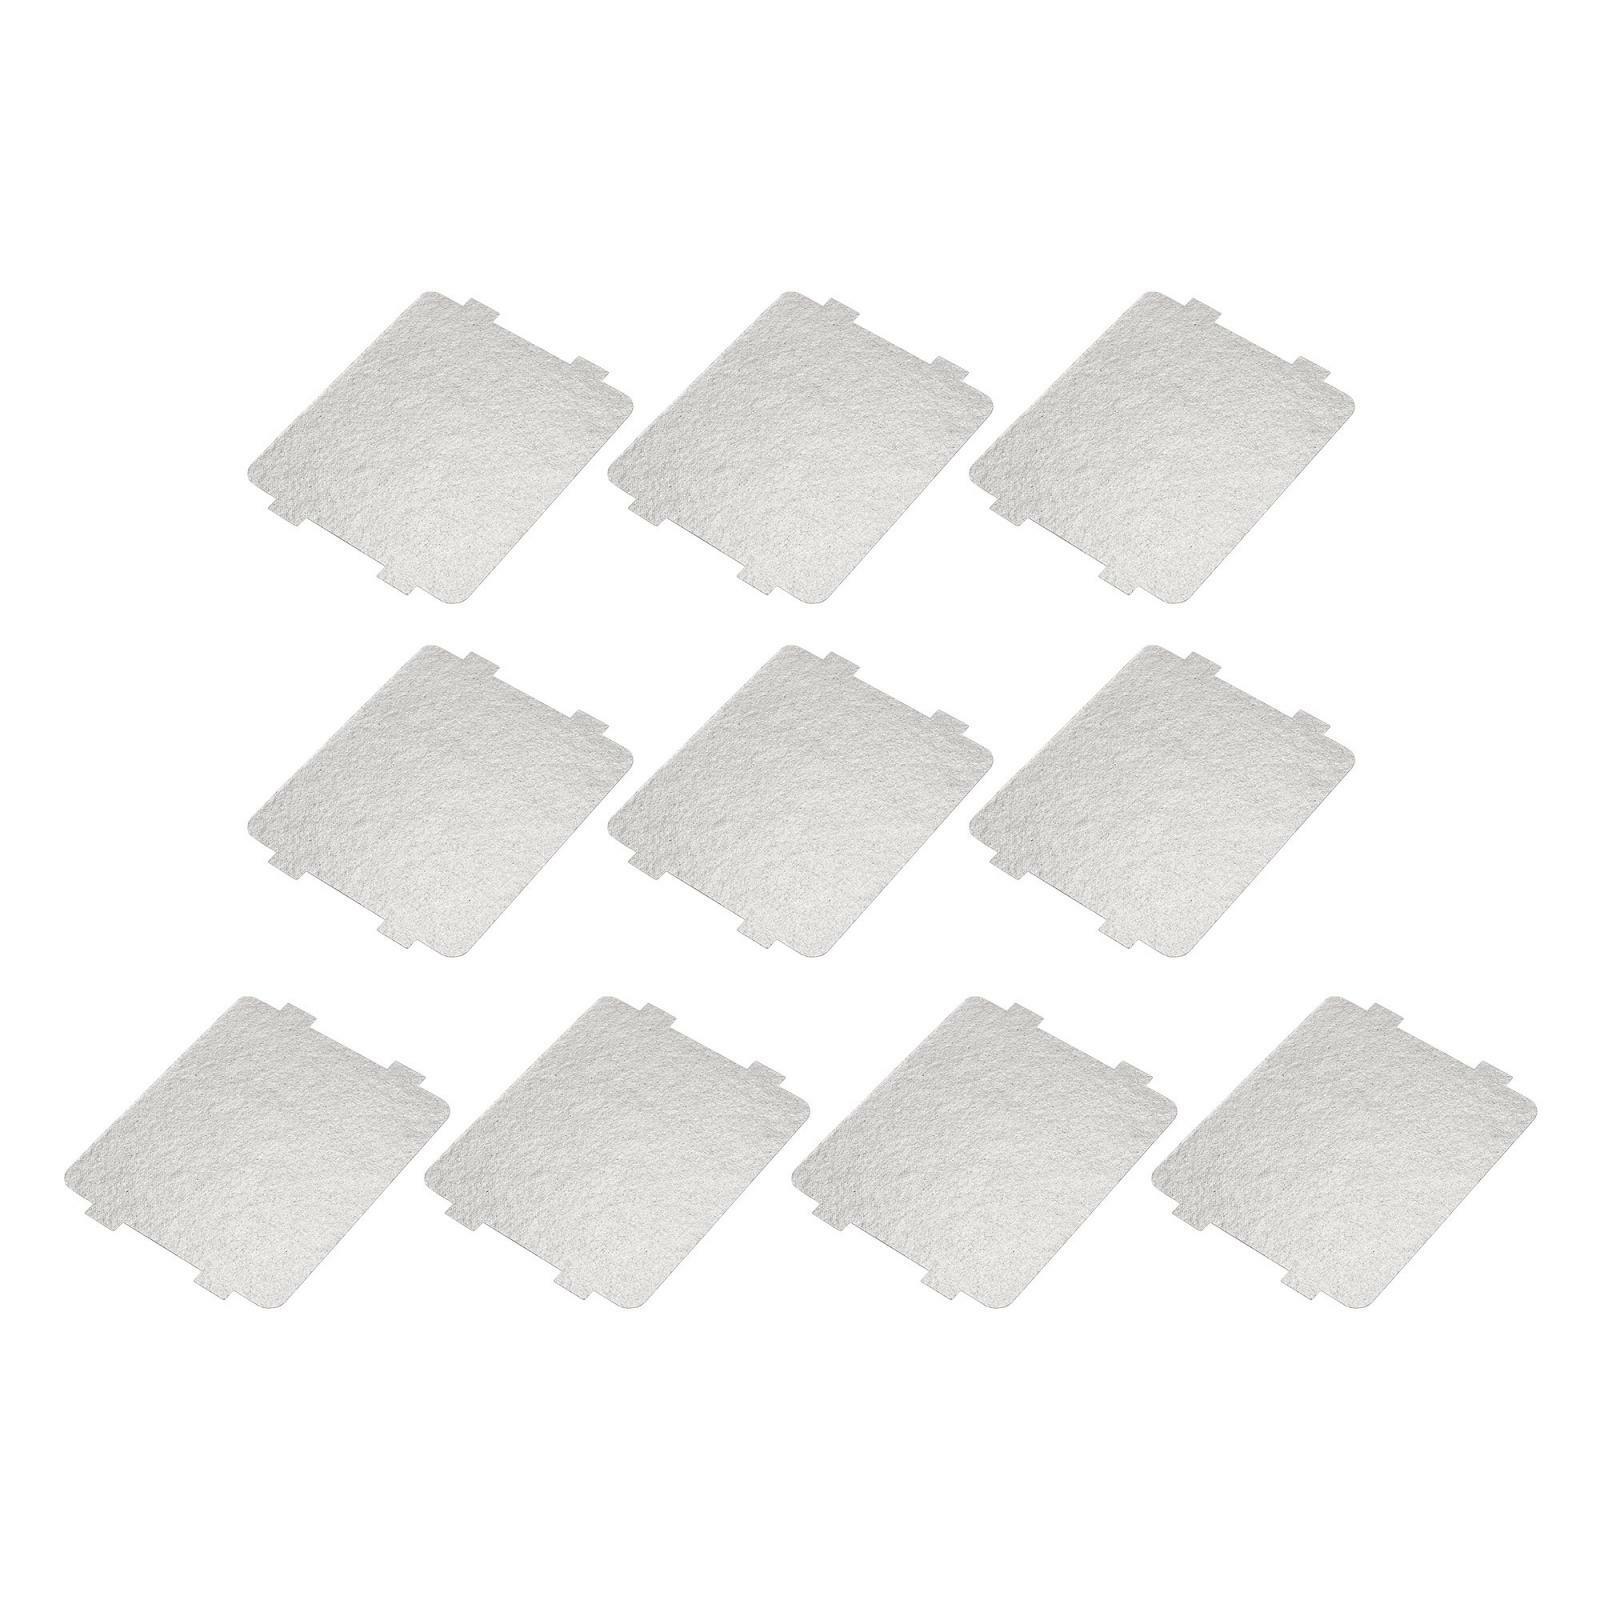 Microwave Oven Waveguide Cover Mica Plate Sheet 10pcs